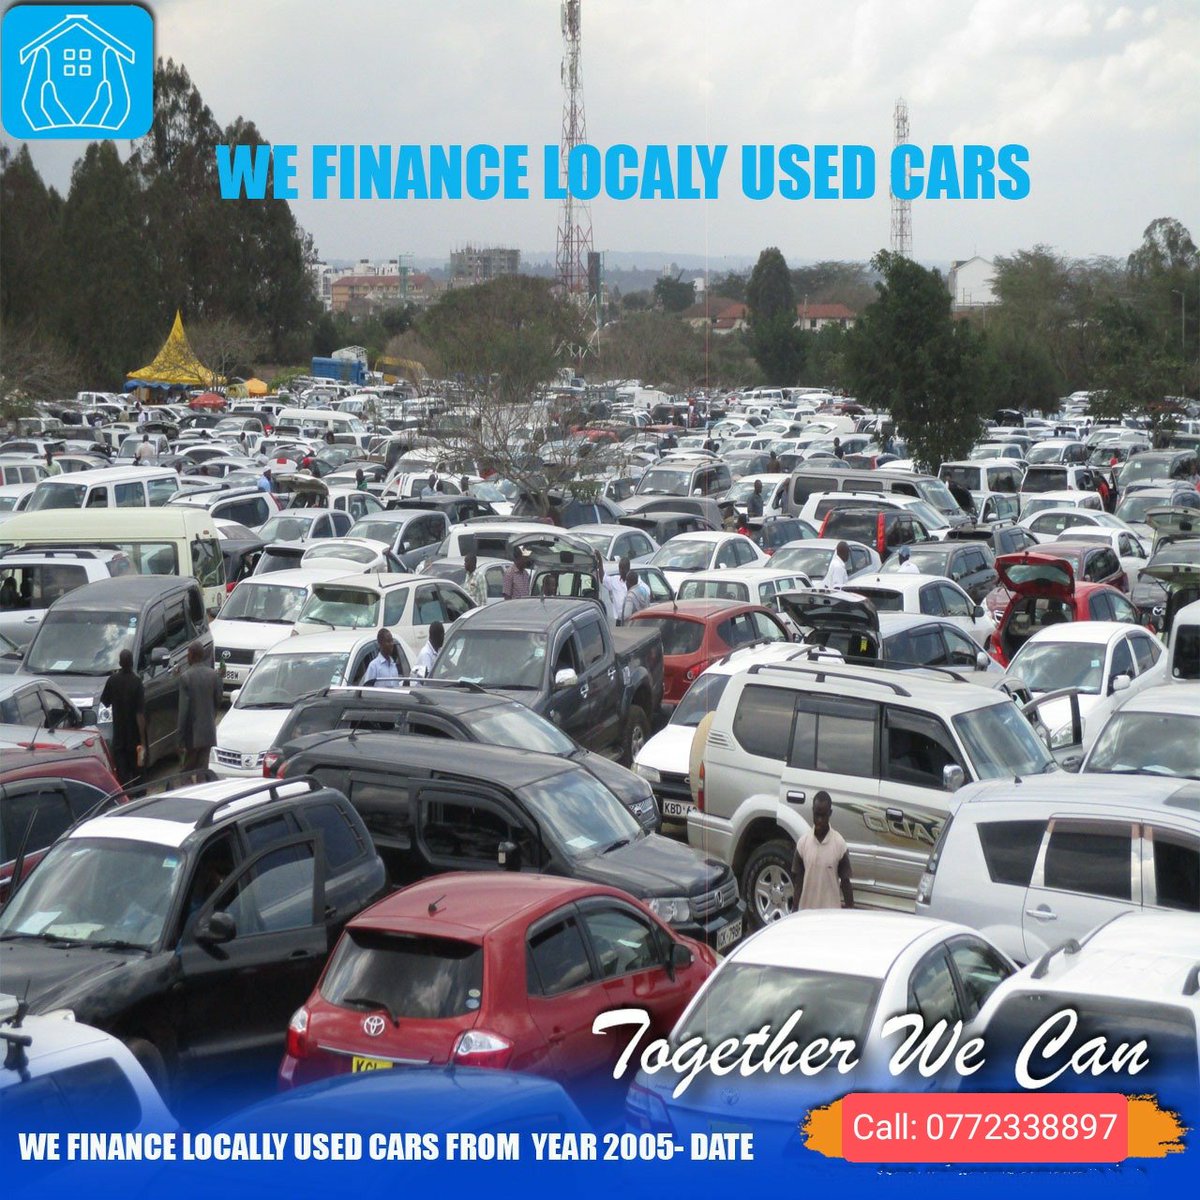 Are you running low on cash and want to buy a vehicle, worry not. We finance up to 70% on the vehicles' market value.
Reach us through 0772338897

#BettyKyalo #Ruto #carbazaar #logbookloan #investment #Finance #credit #microfinance #goodfortunecredit